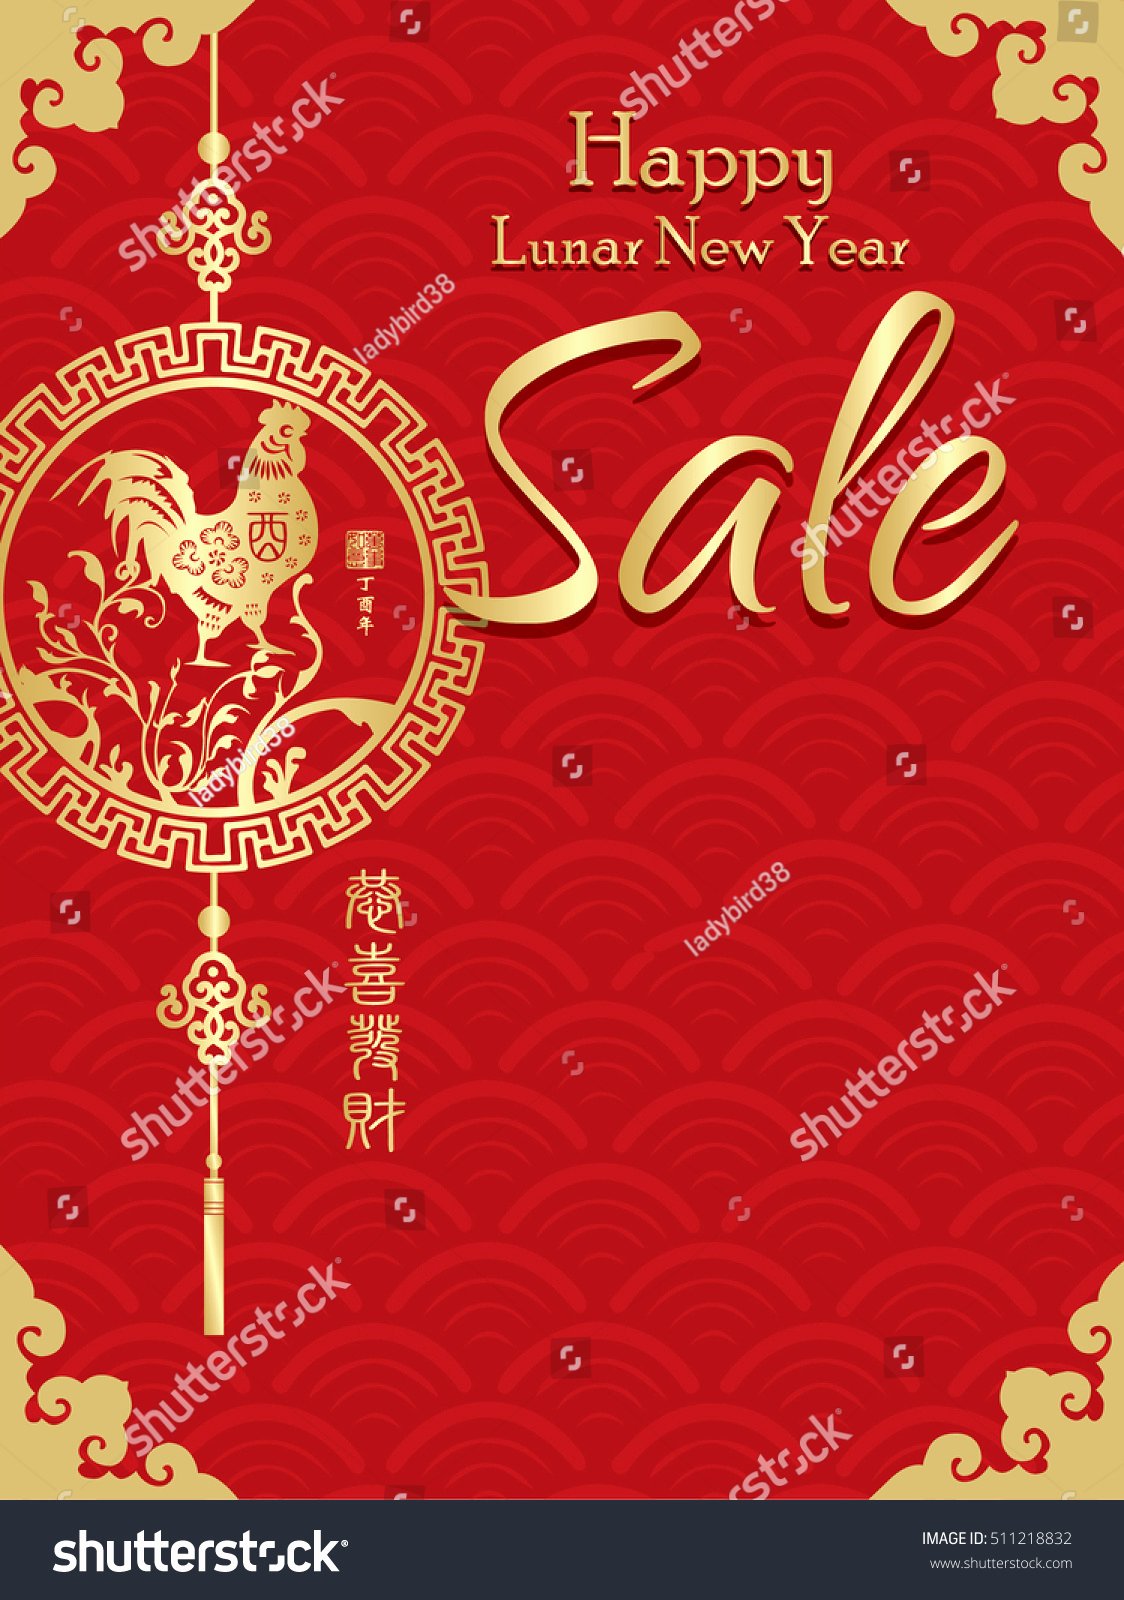 Chinese New Year Sale Design Template Stock Vector